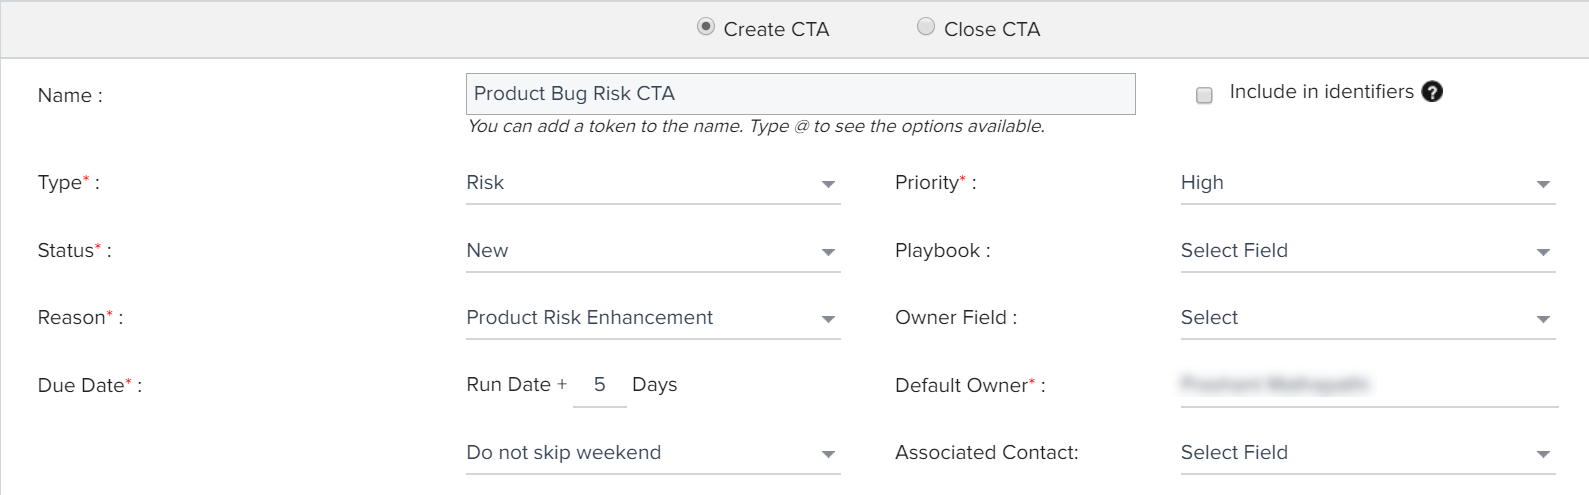 Creating CTA as Rule Action_2.png